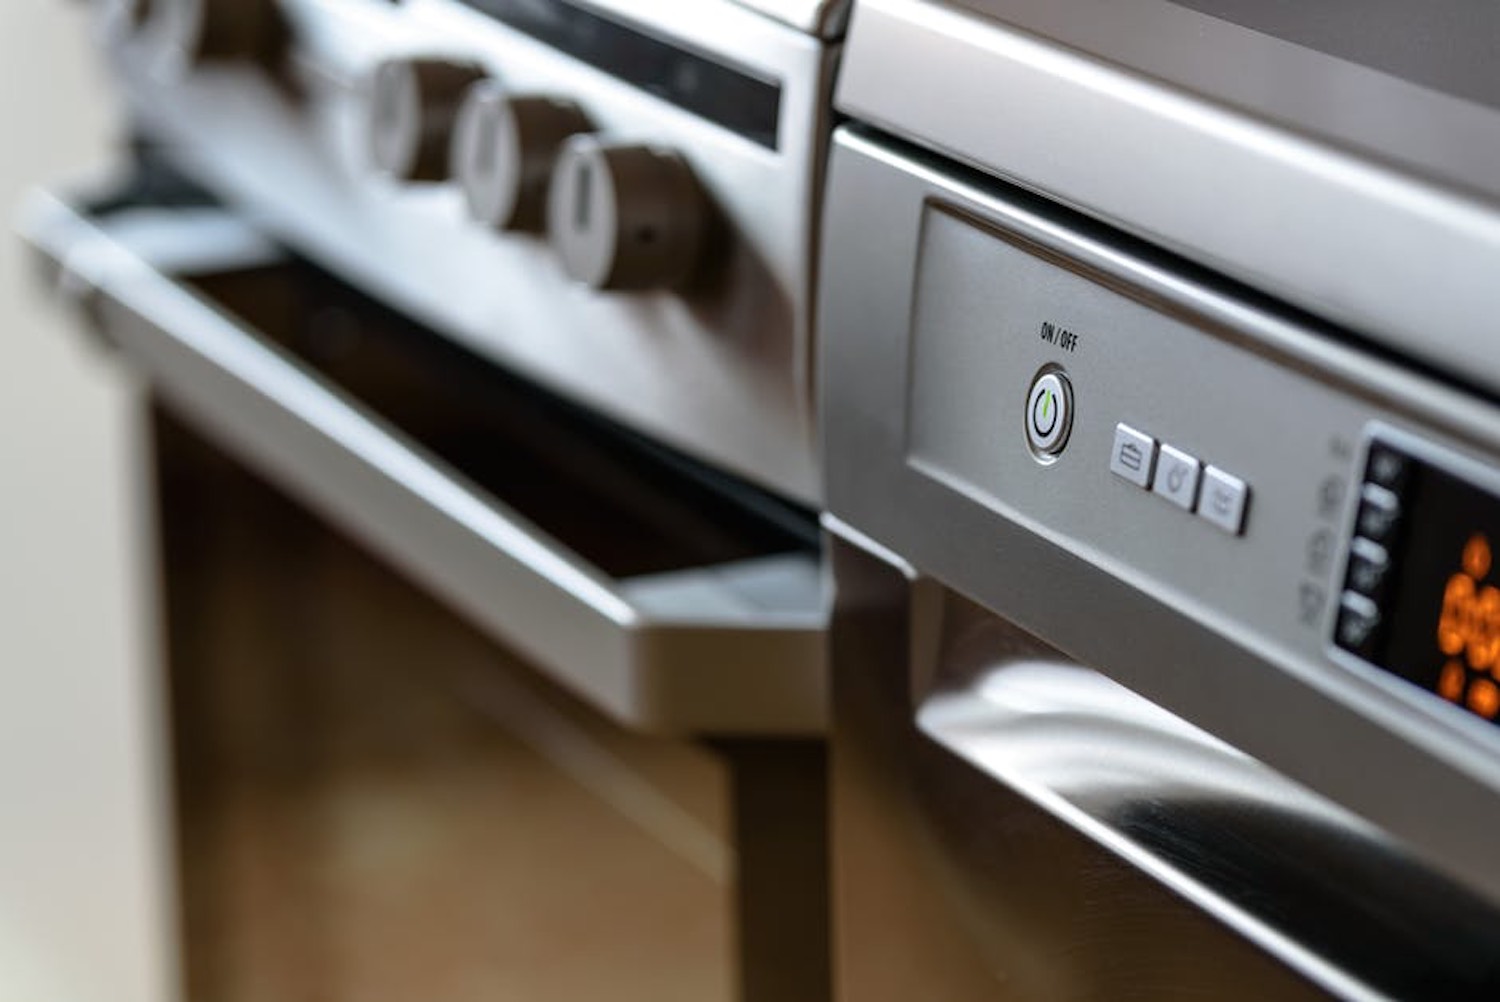 10 Cooking Facts to Remember When Firing Up Your Stove